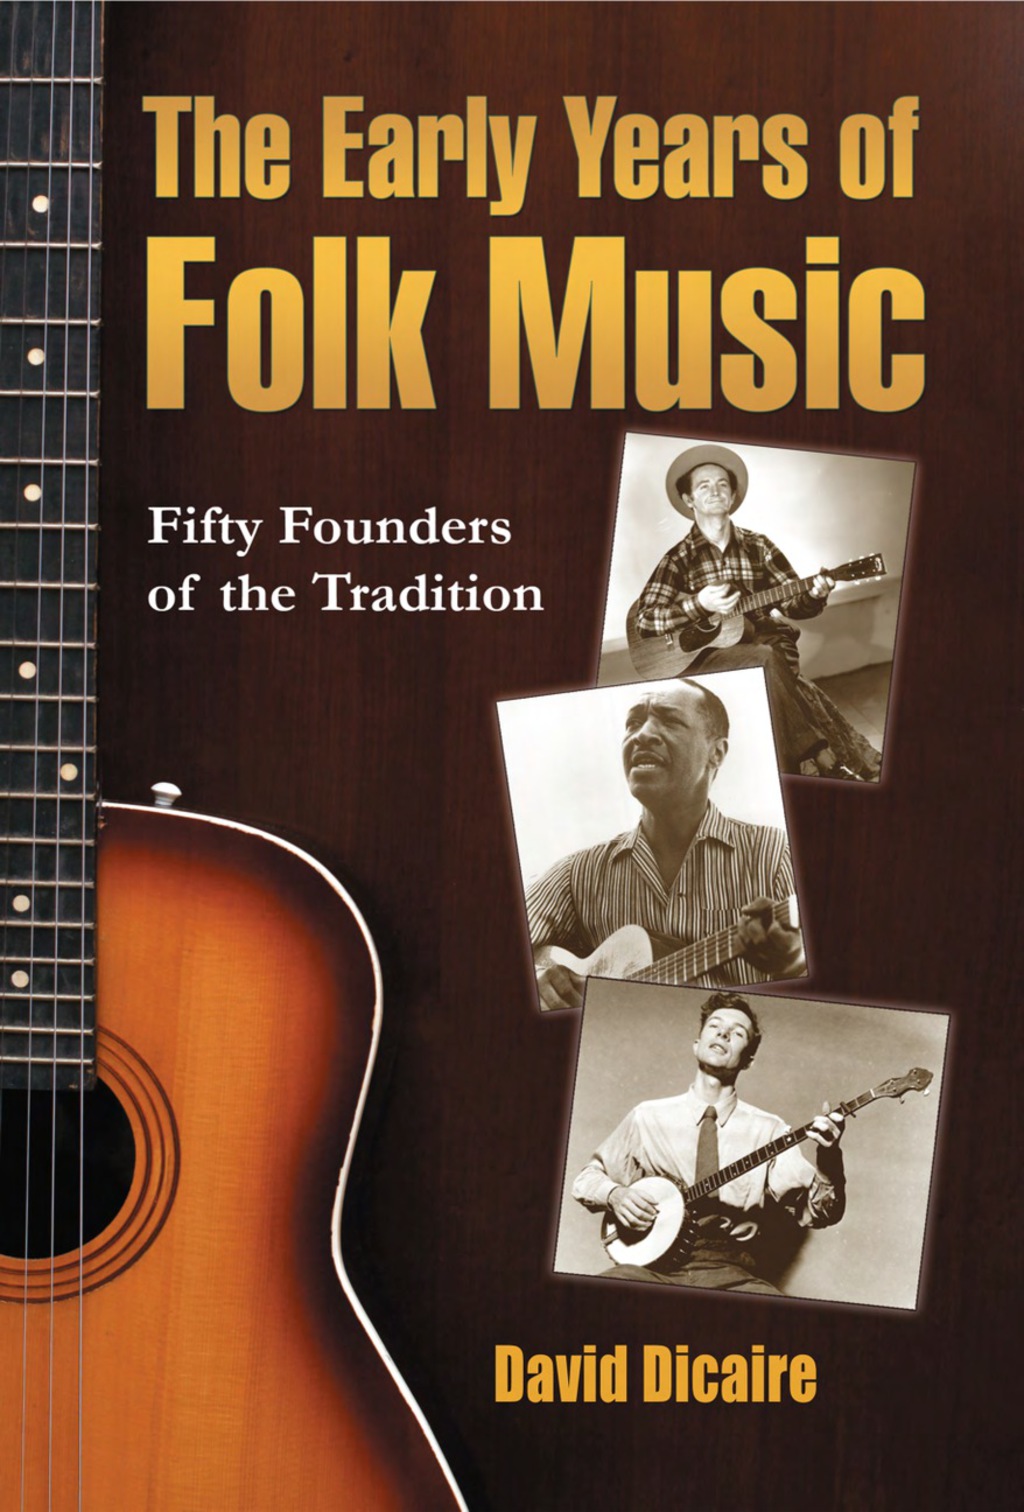 The Early Years of Folk Music: Fifty Founders of the Tradition (eBook) - David Dicaire,